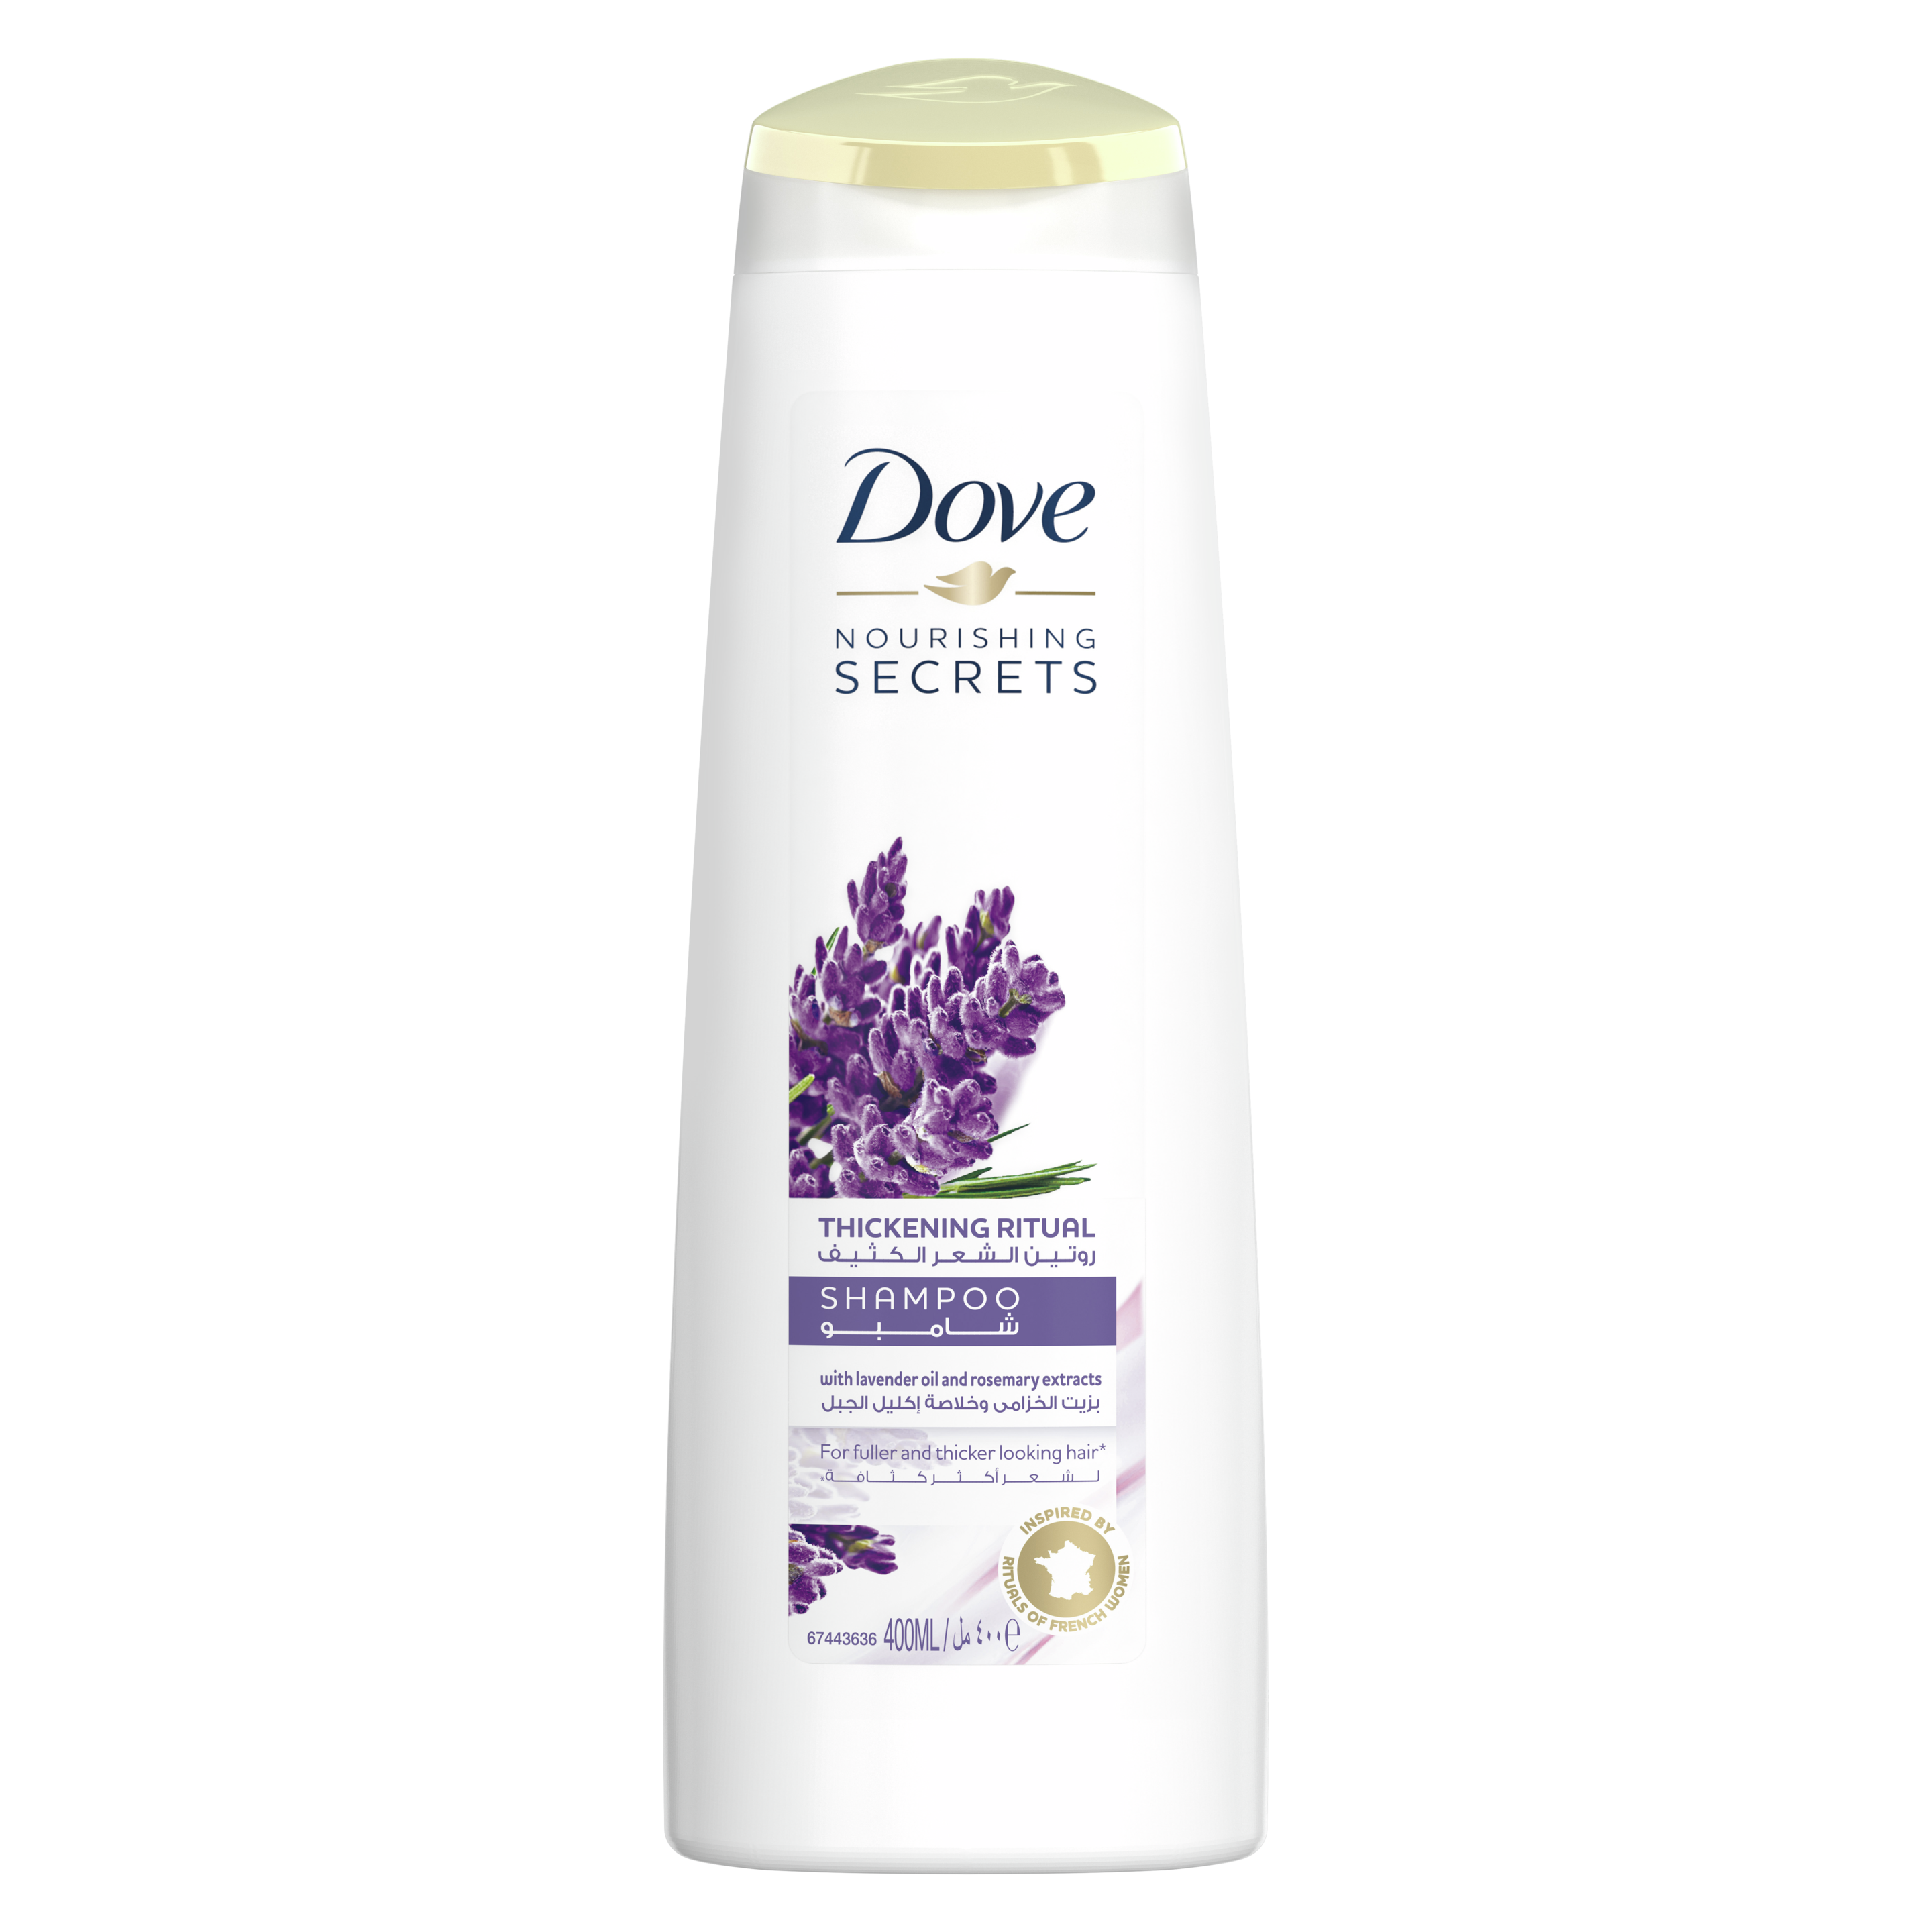 Dove Nourishing Secrets ShampooRelaxing Ritual - Lavender Oil and Rosemary Extract 400ml